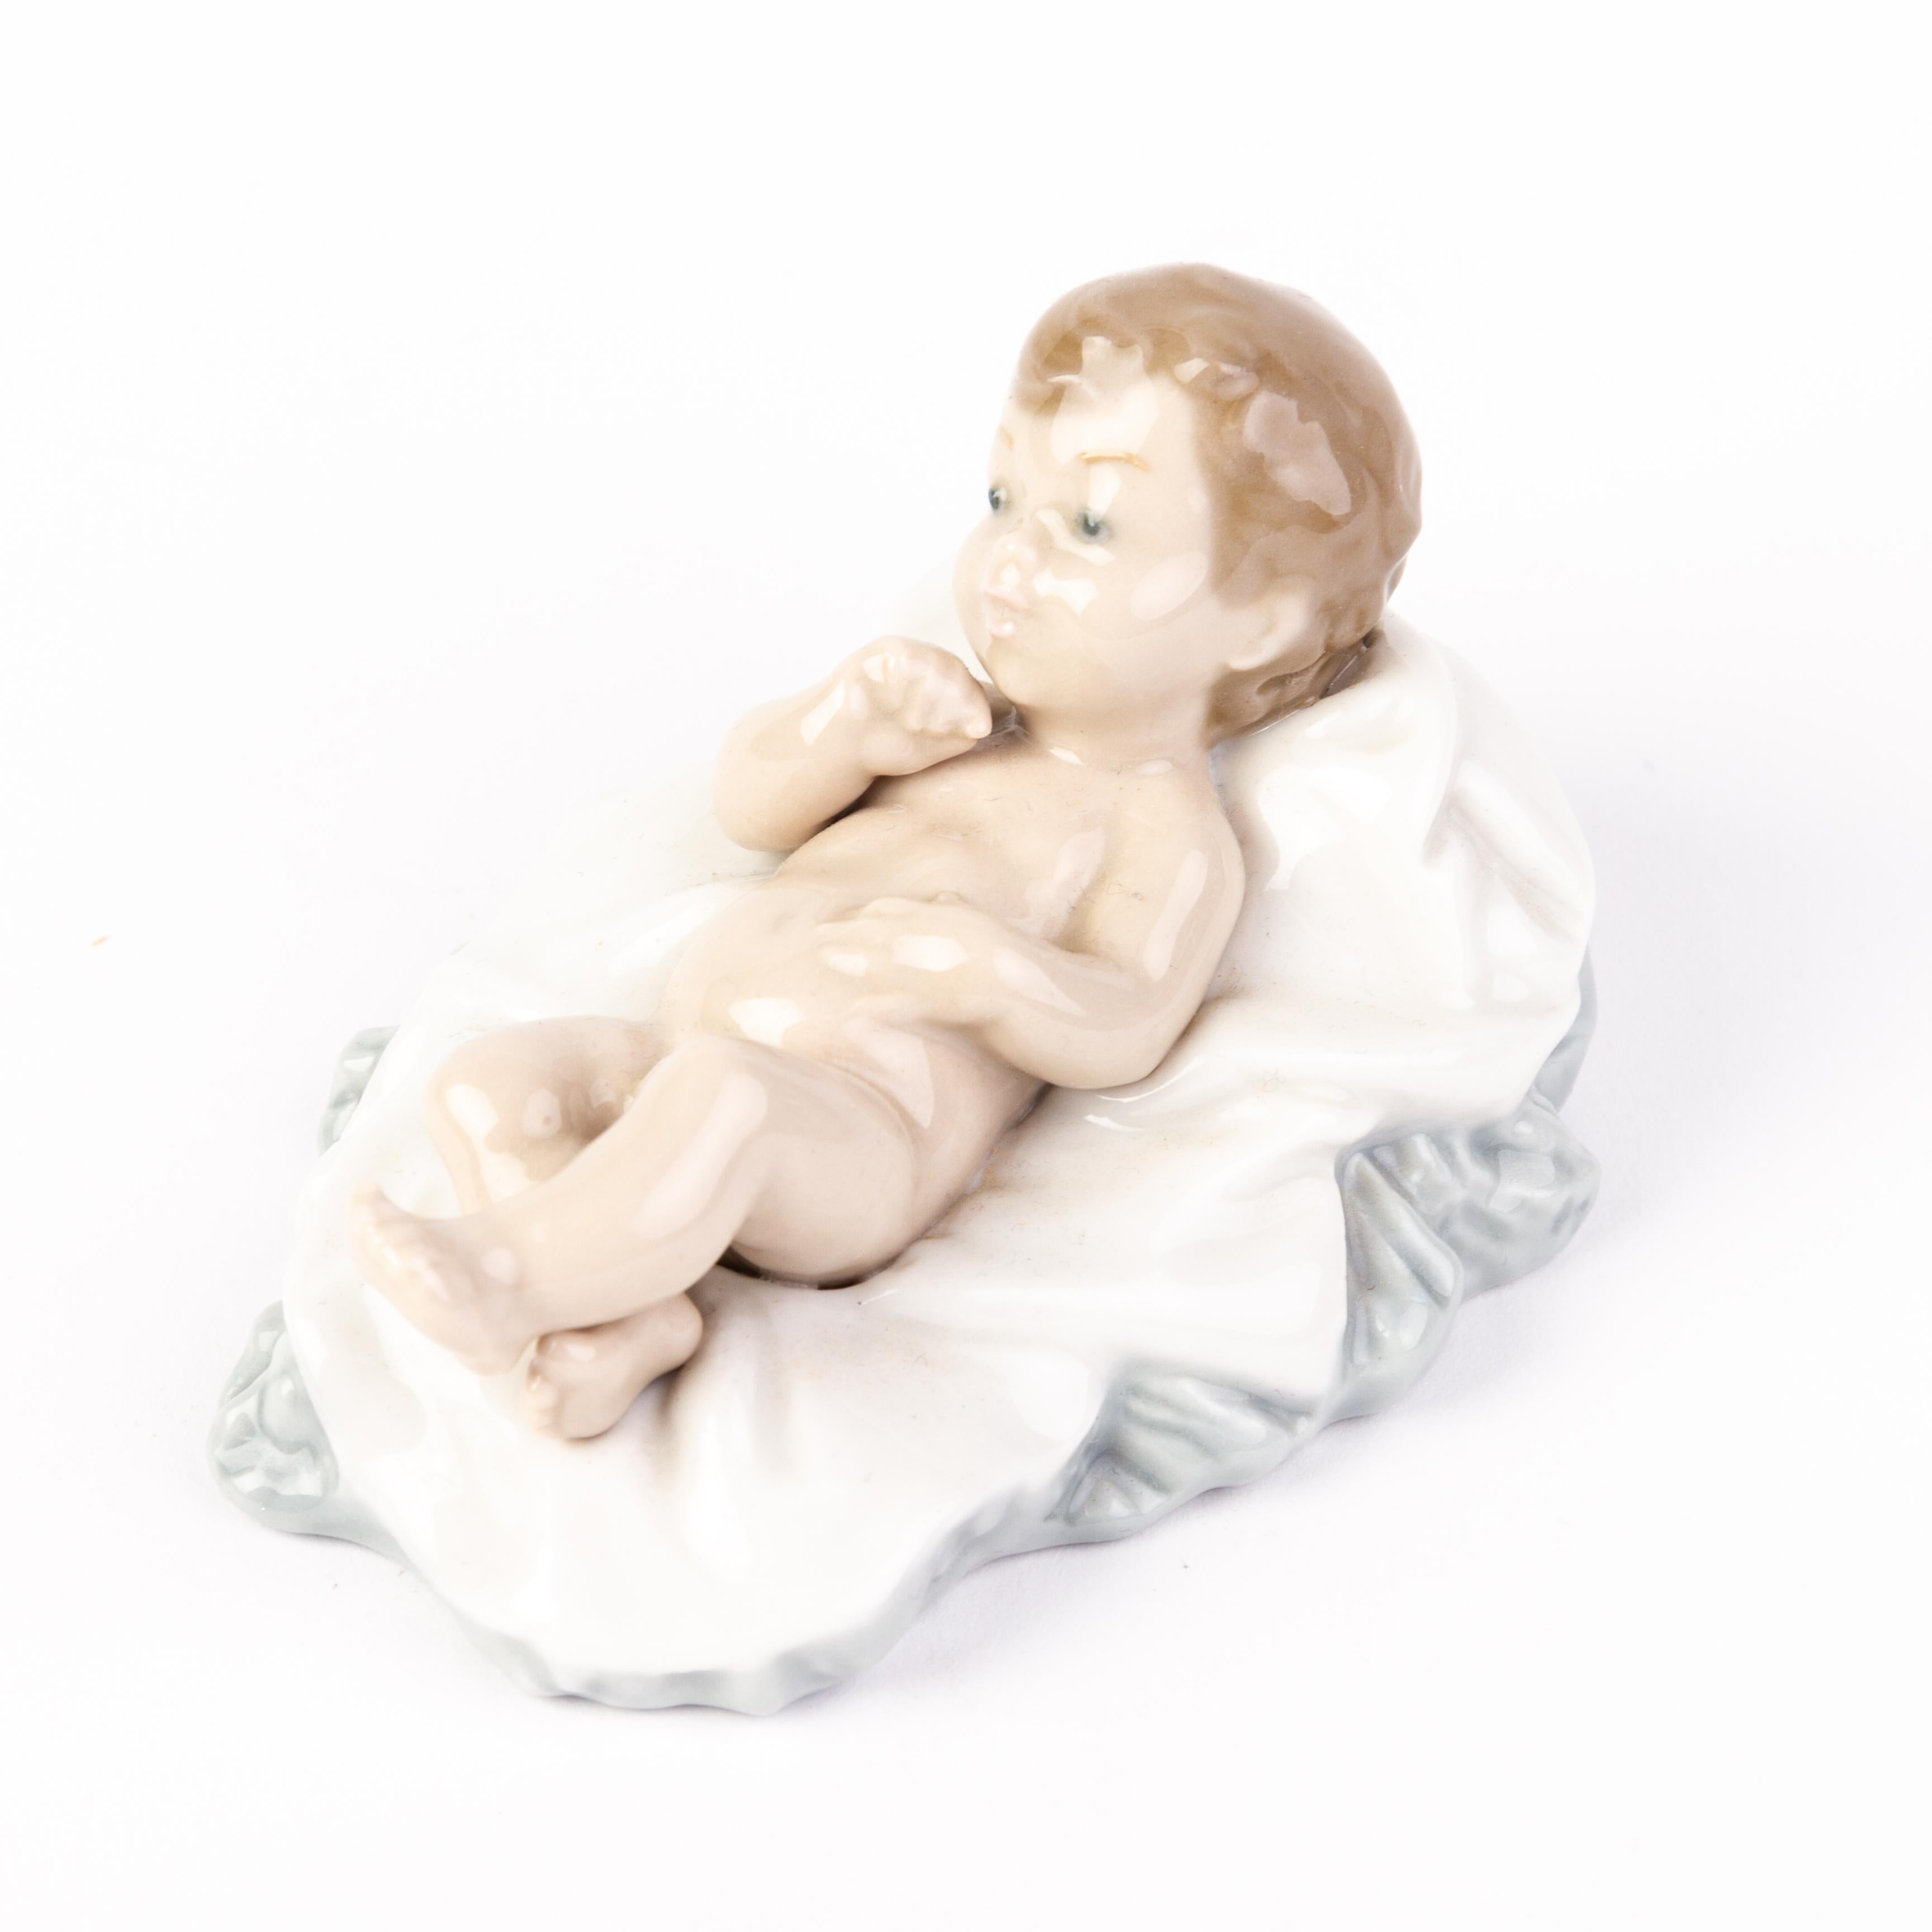 In good condition
From a private collection
Free international shipping
Nao Lladro Fine Porcelain Baby Jesus Nativity Figure 